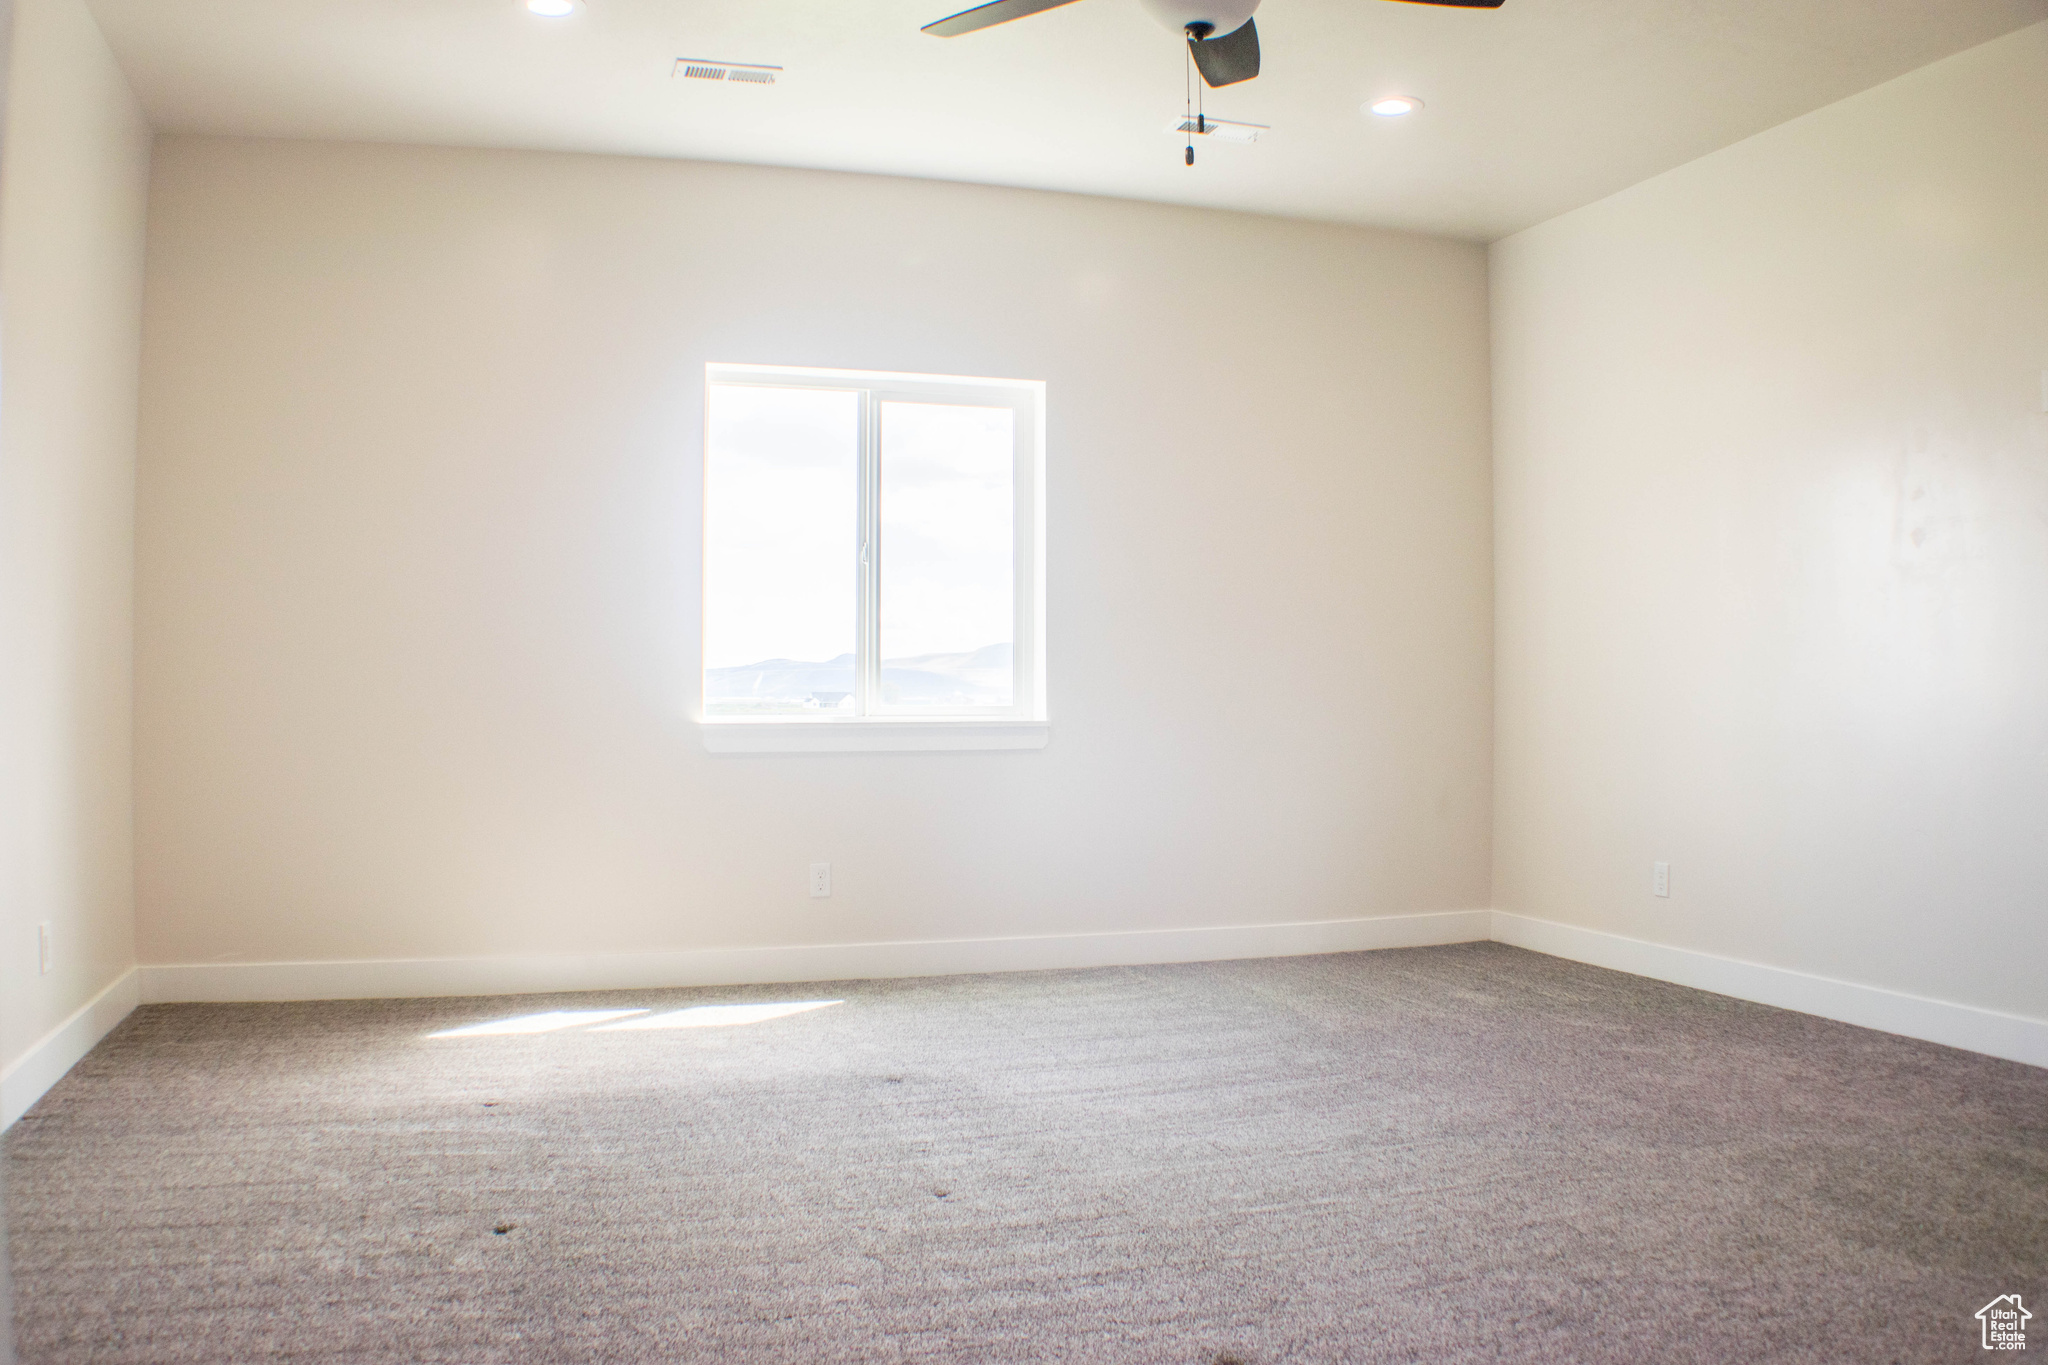 Master Bedroom carpeted room with ceiling fan